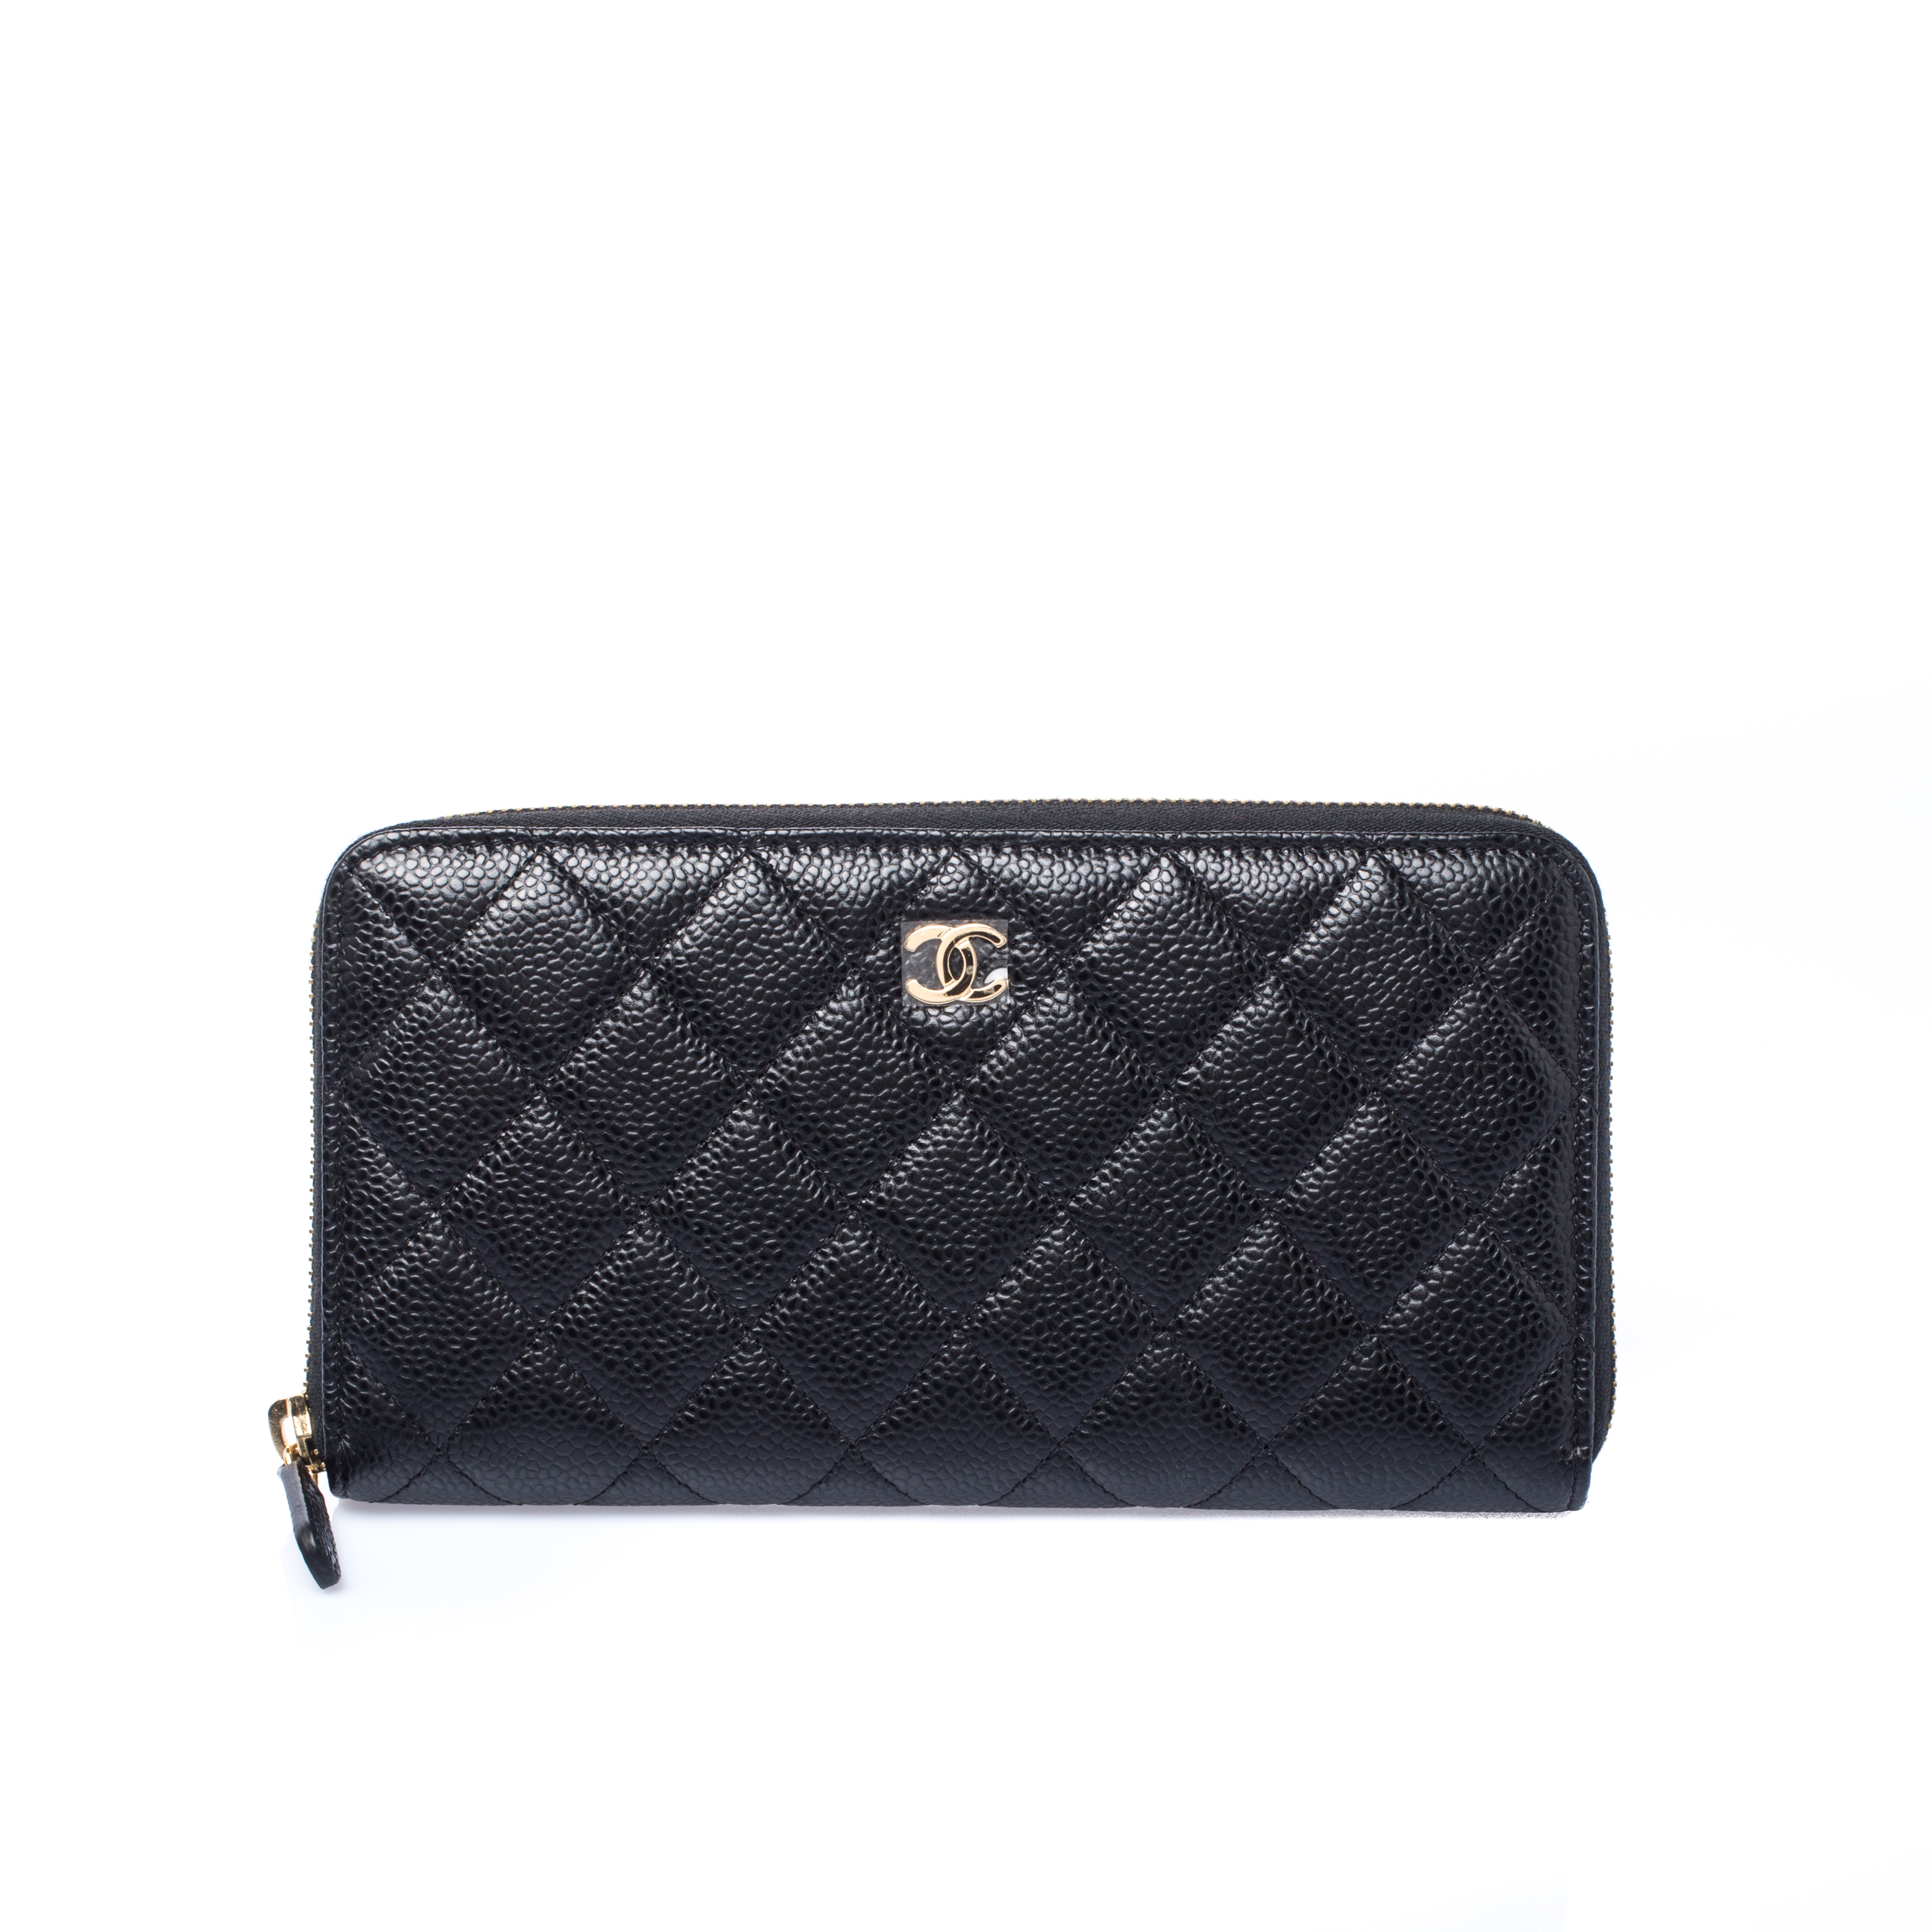 Chanel Black Quilted Leather Zip Around Wallet Chanel | The Luxury Closet